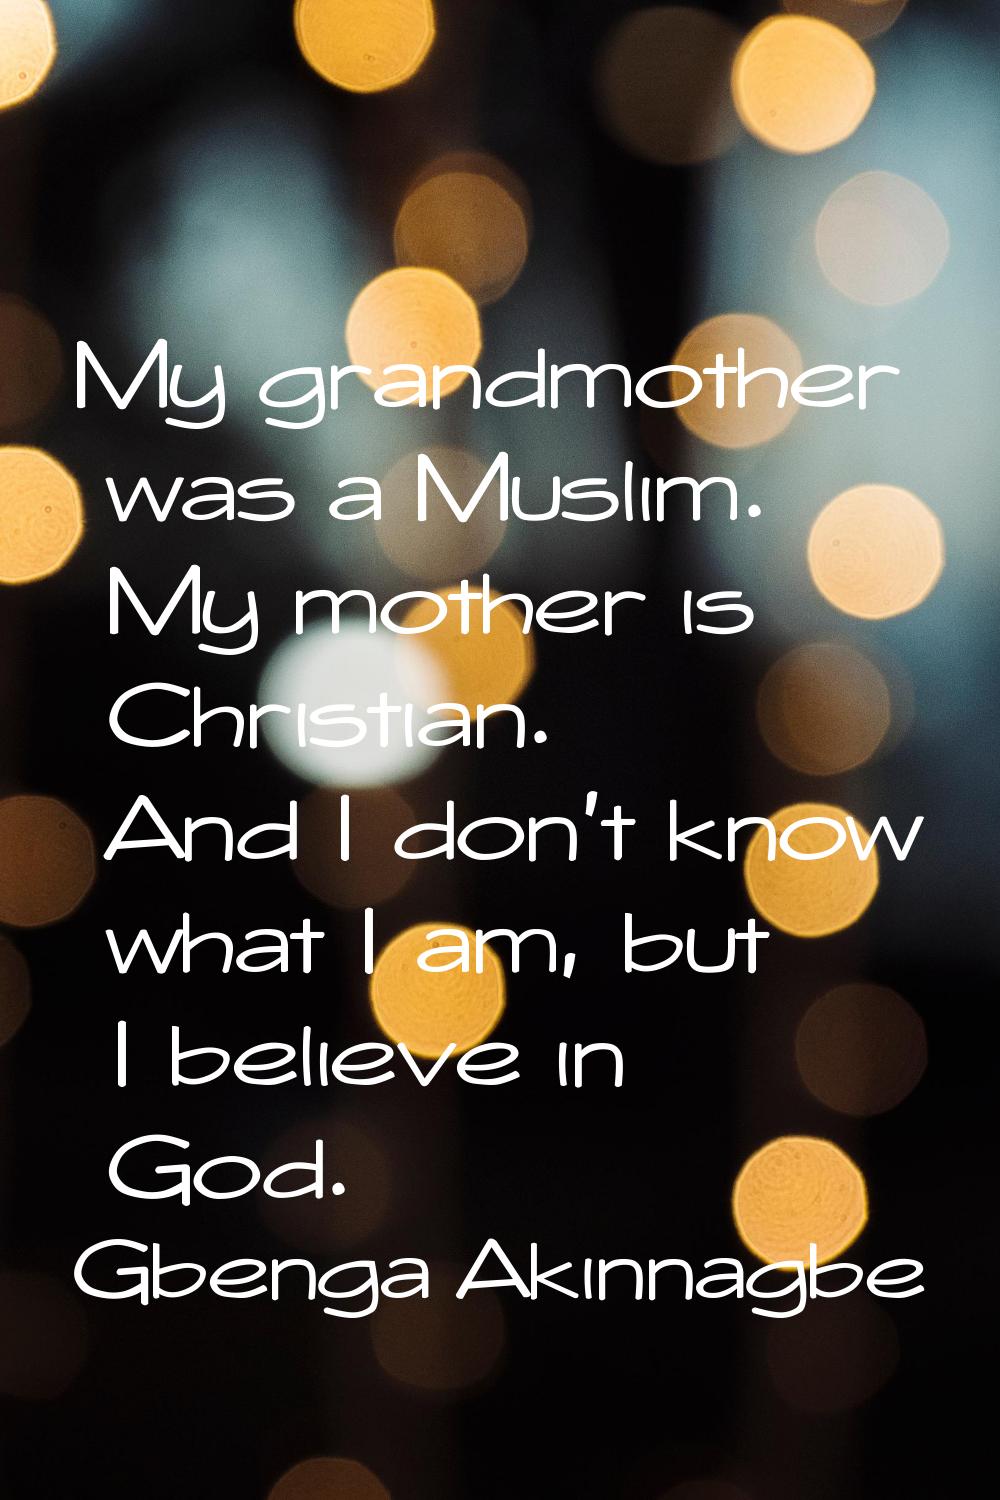 My grandmother was a Muslim. My mother is Christian. And I don't know what I am, but I believe in G